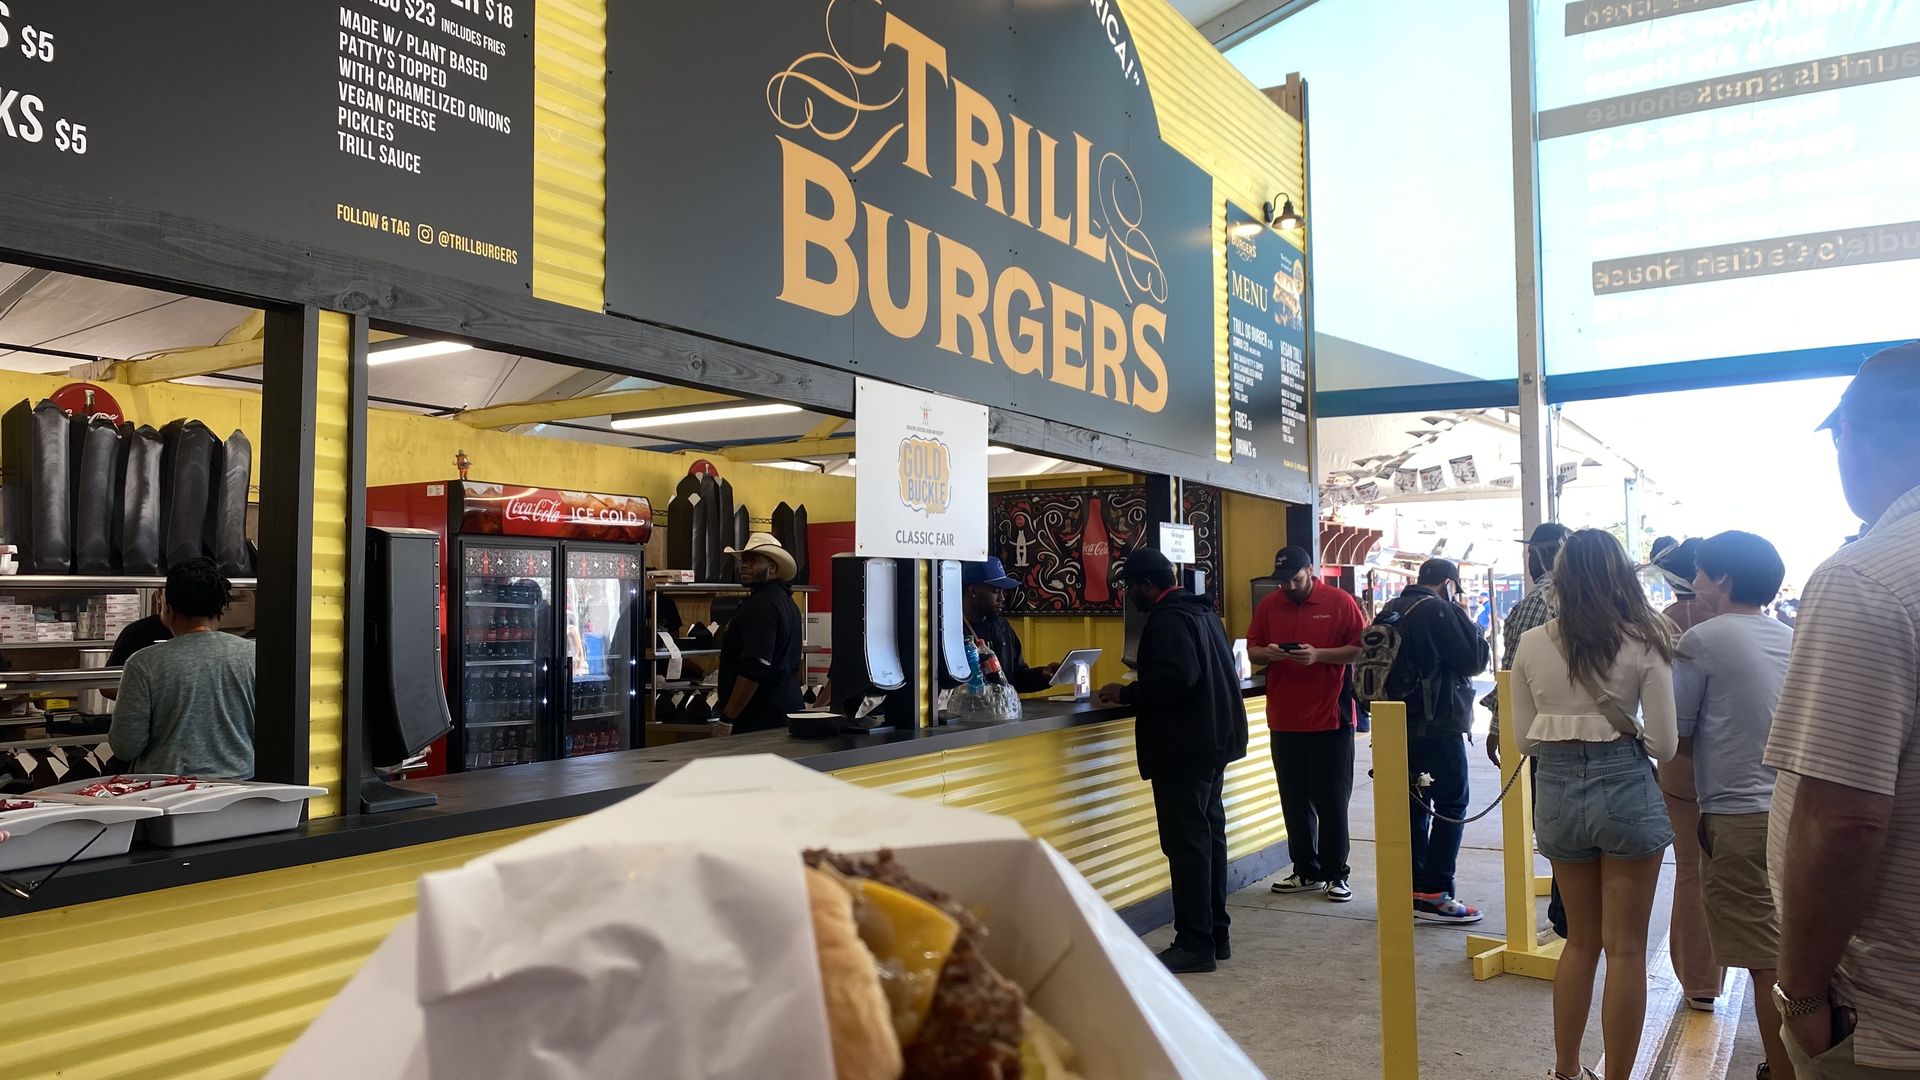 Photo of a burger in front of "Trill Burgers" stand